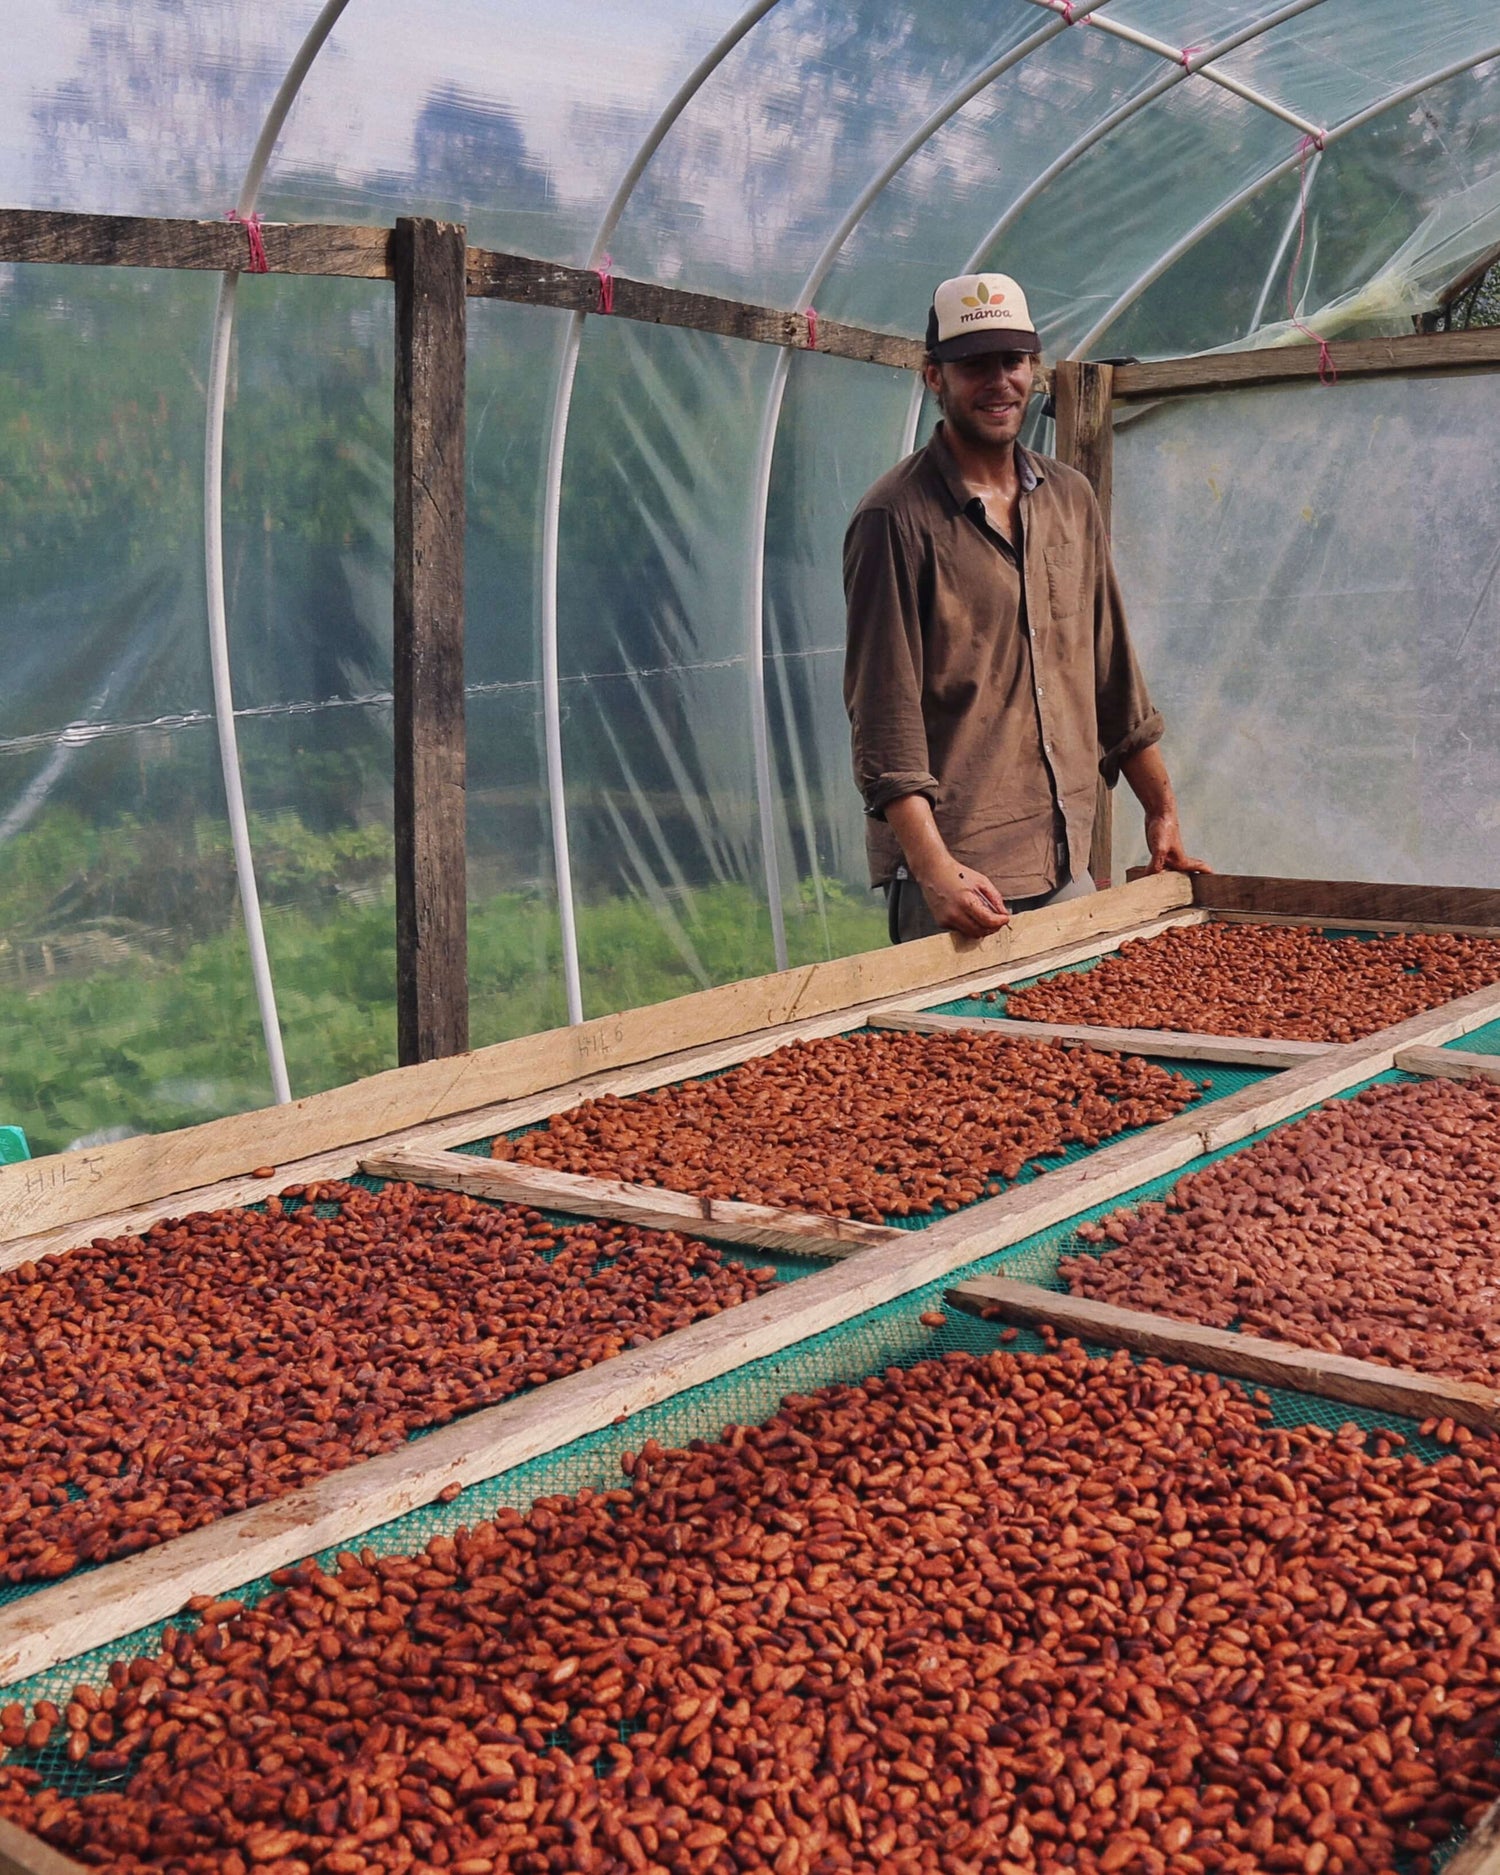 Image of man with dried cacao beans